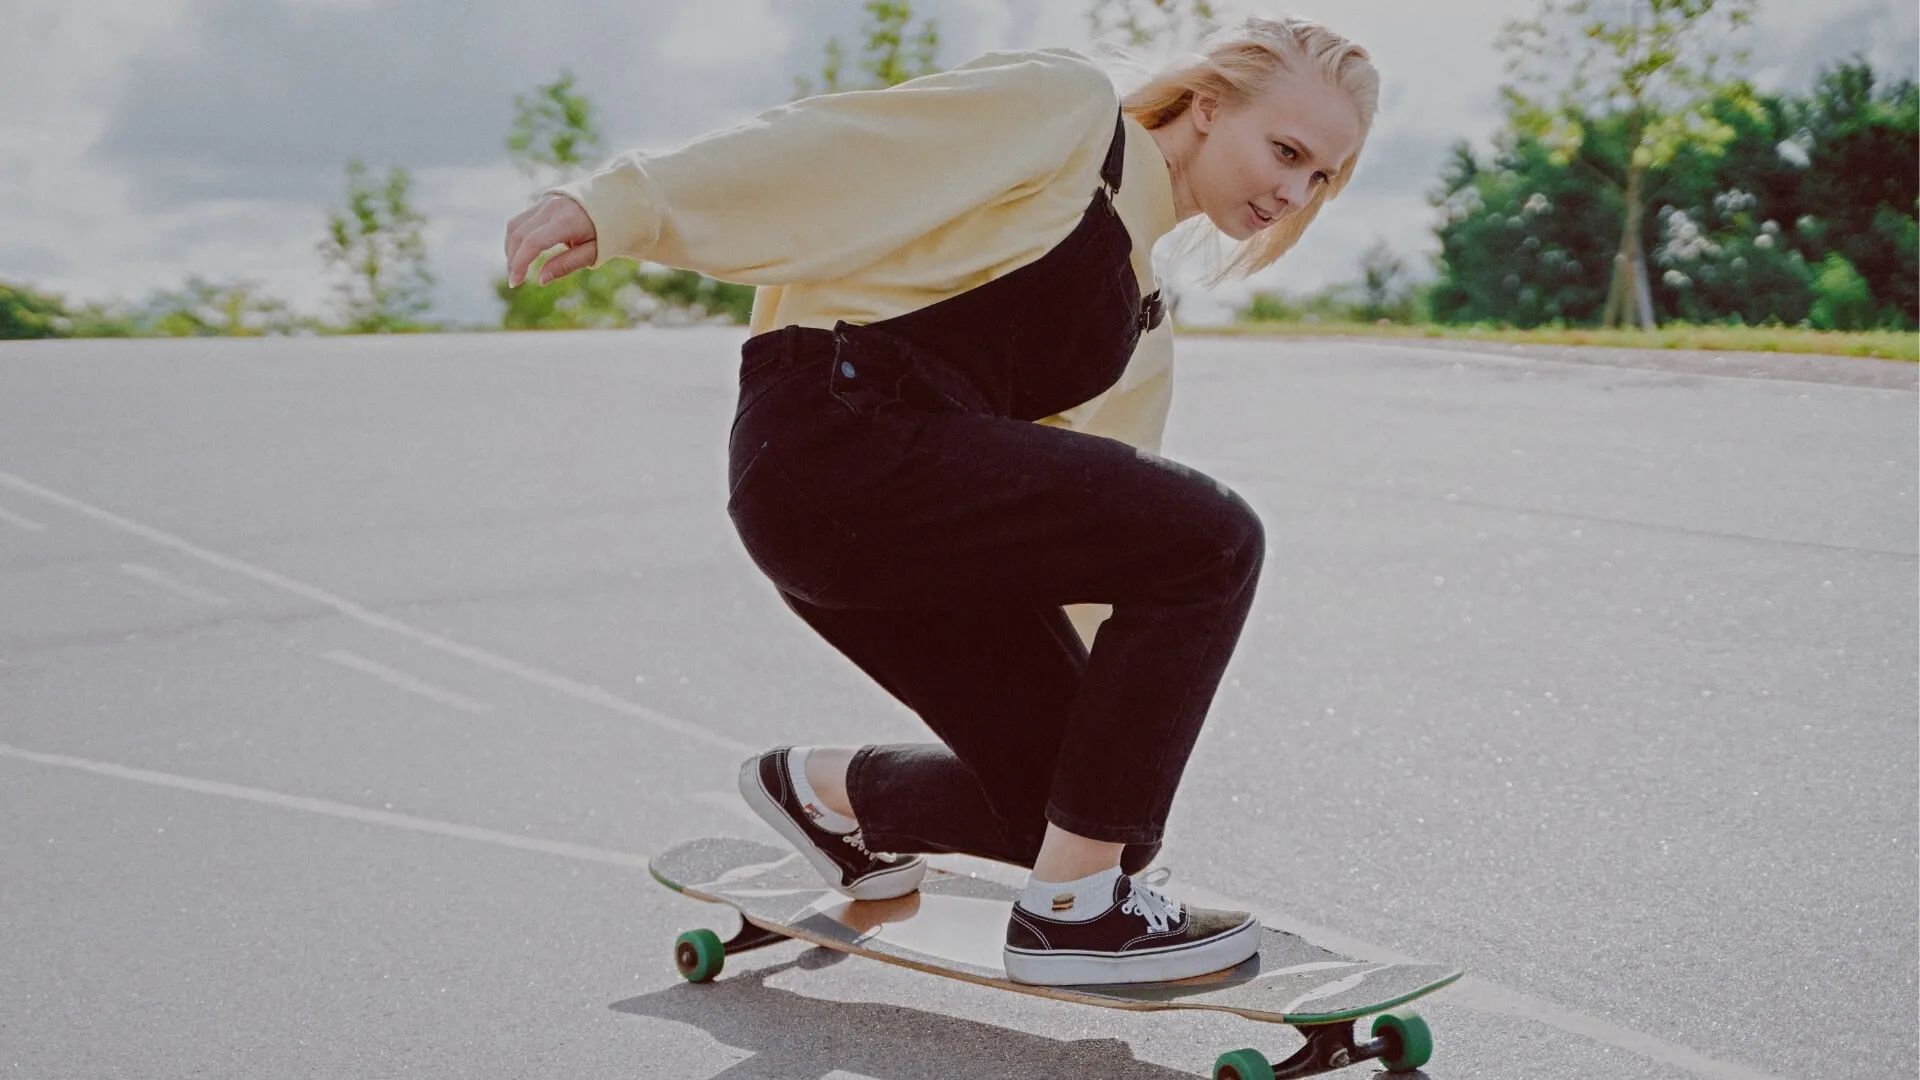 Get To Know Some Of The Best Longboards For